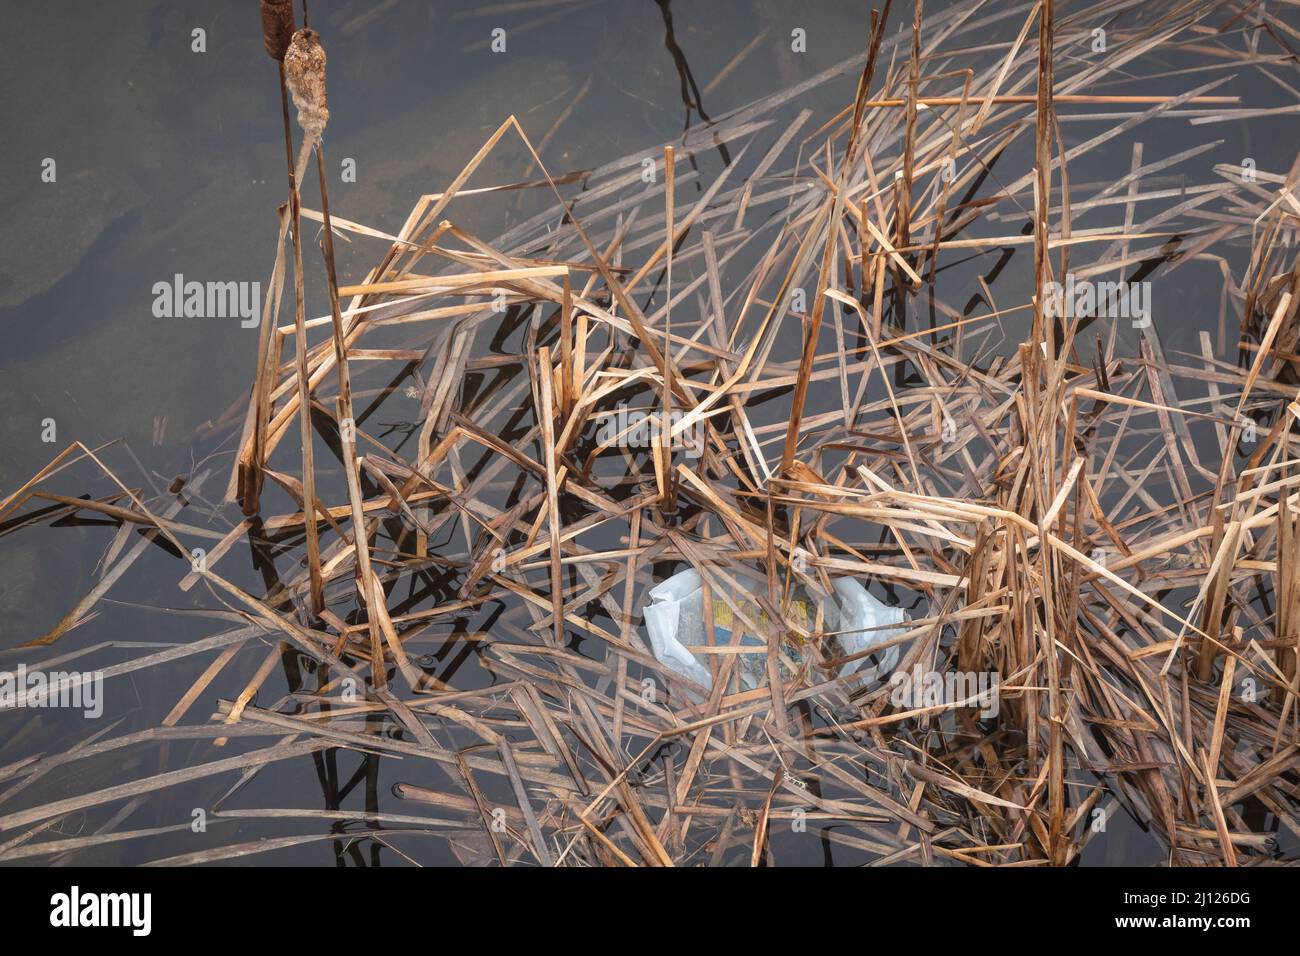 Plastic pollution - a plastic bottle floating in the cattails along the Sacandaga River near Speculator, NY USA in the Adirondack Mountains. Stock Photo